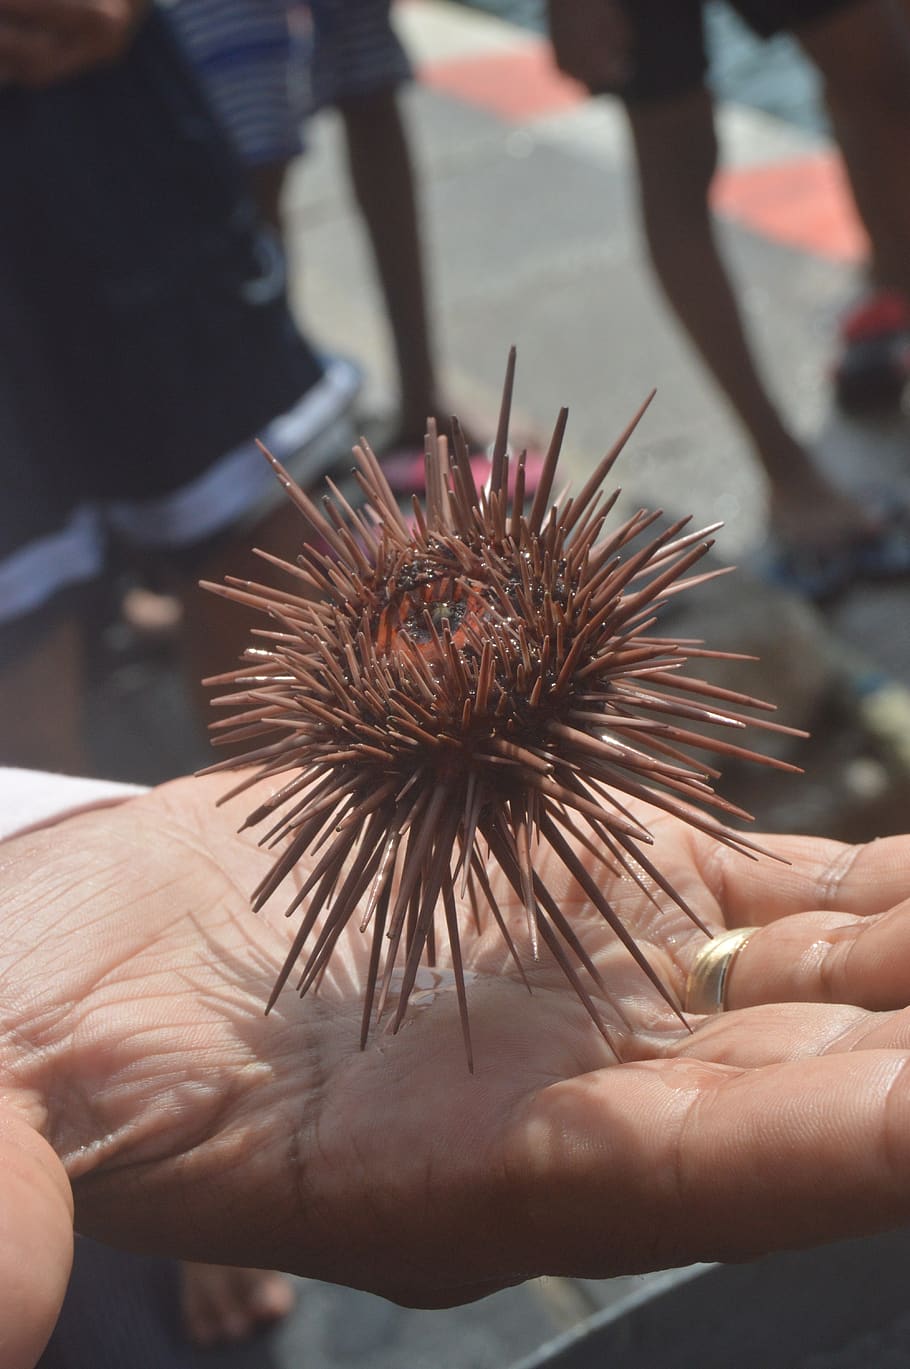 animal, marine, hand, human hand, human body part, sea urchin, real people, unrecognizable person, focus on foreground, holding